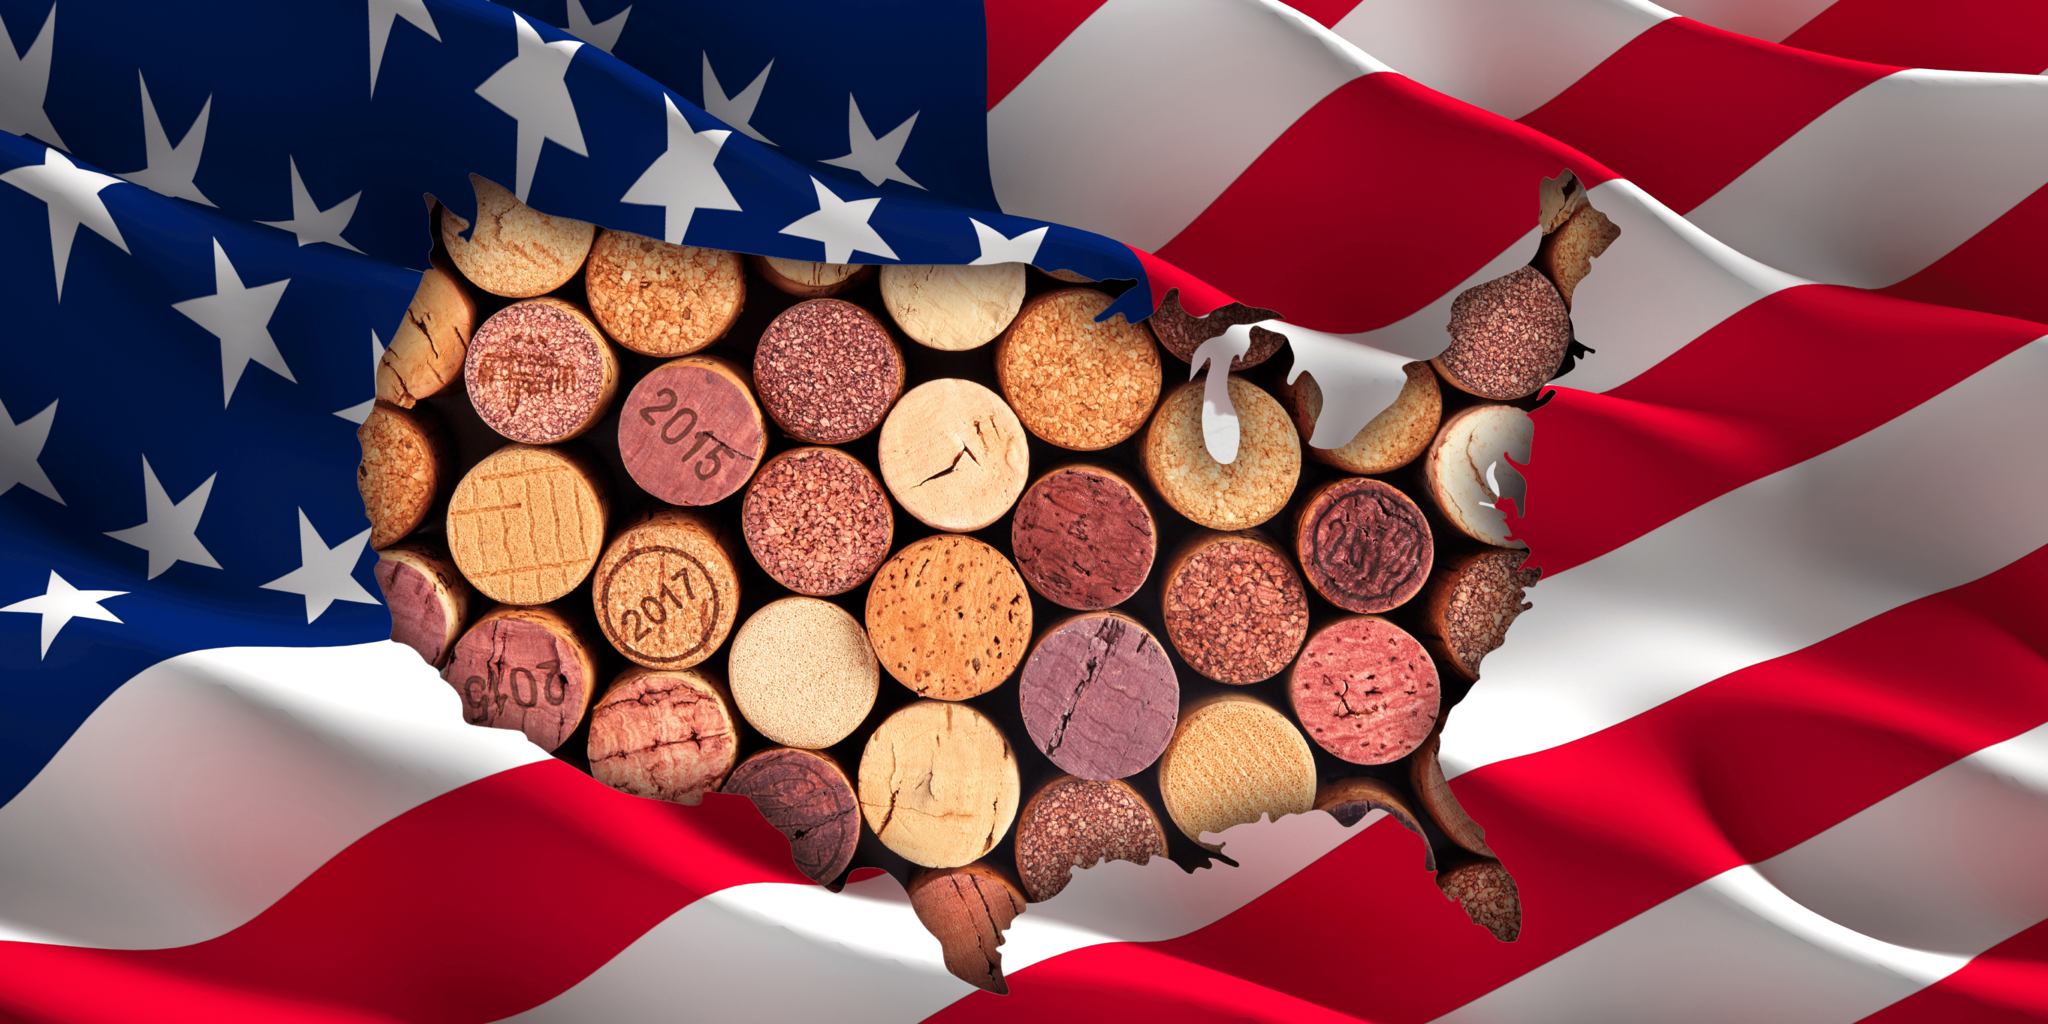 Fine wines from the USA